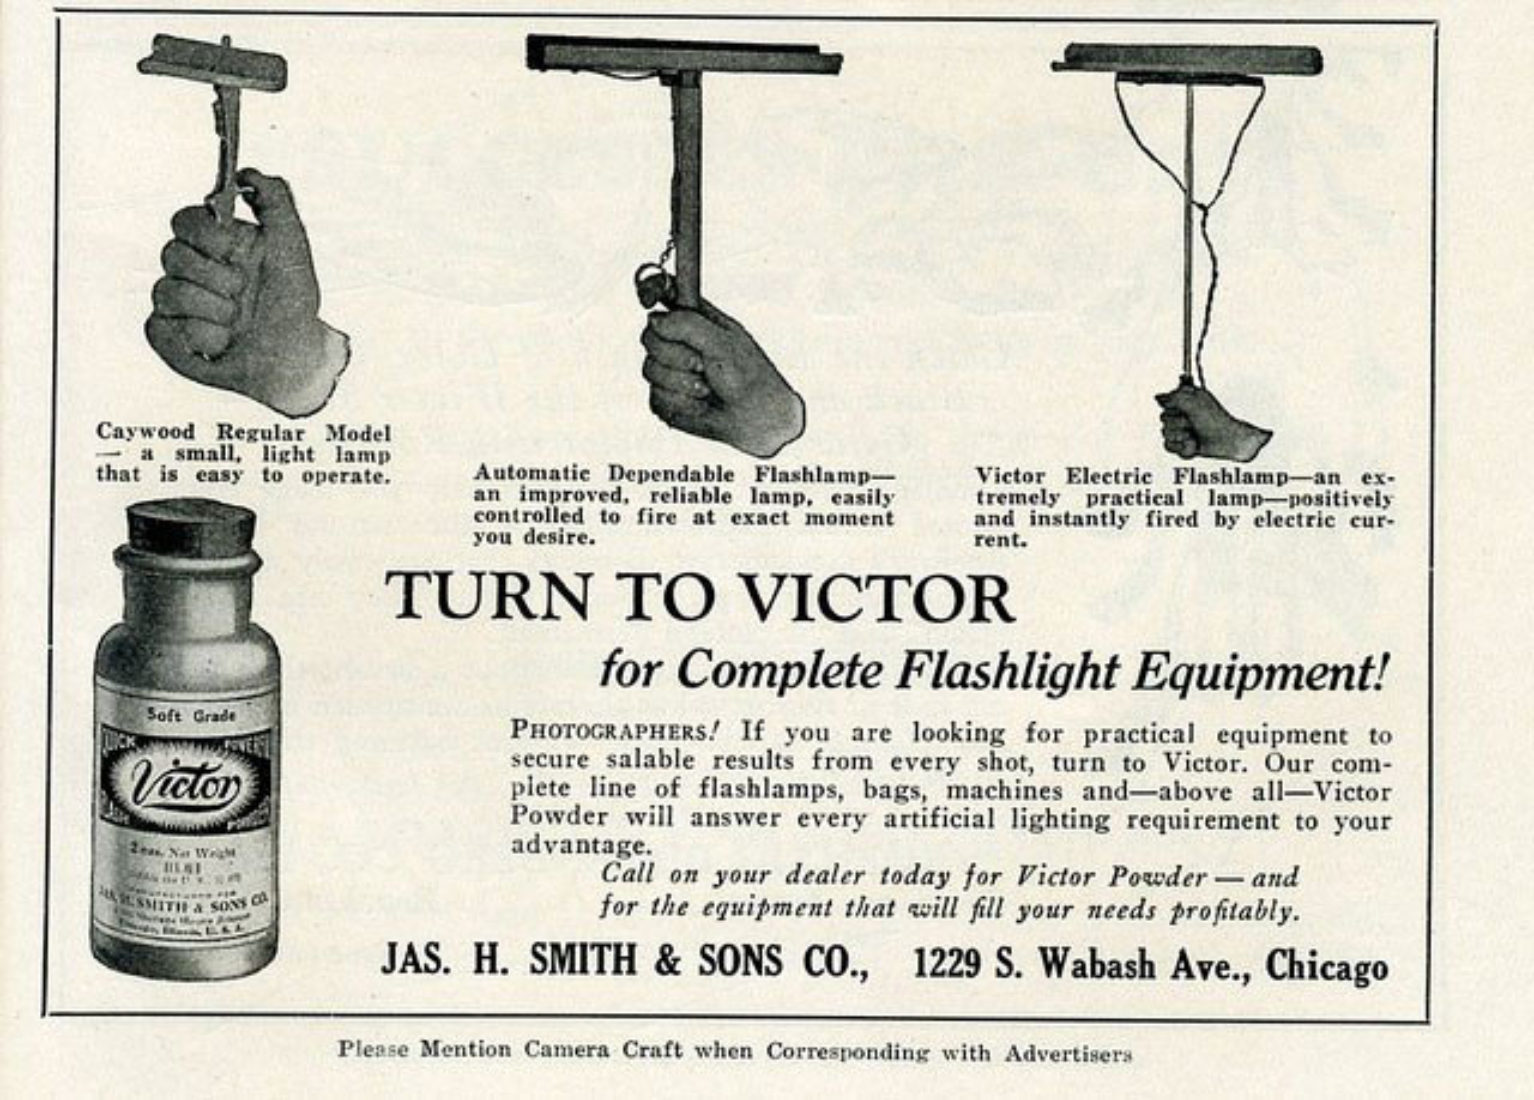 image of a poster about flashlight equipment